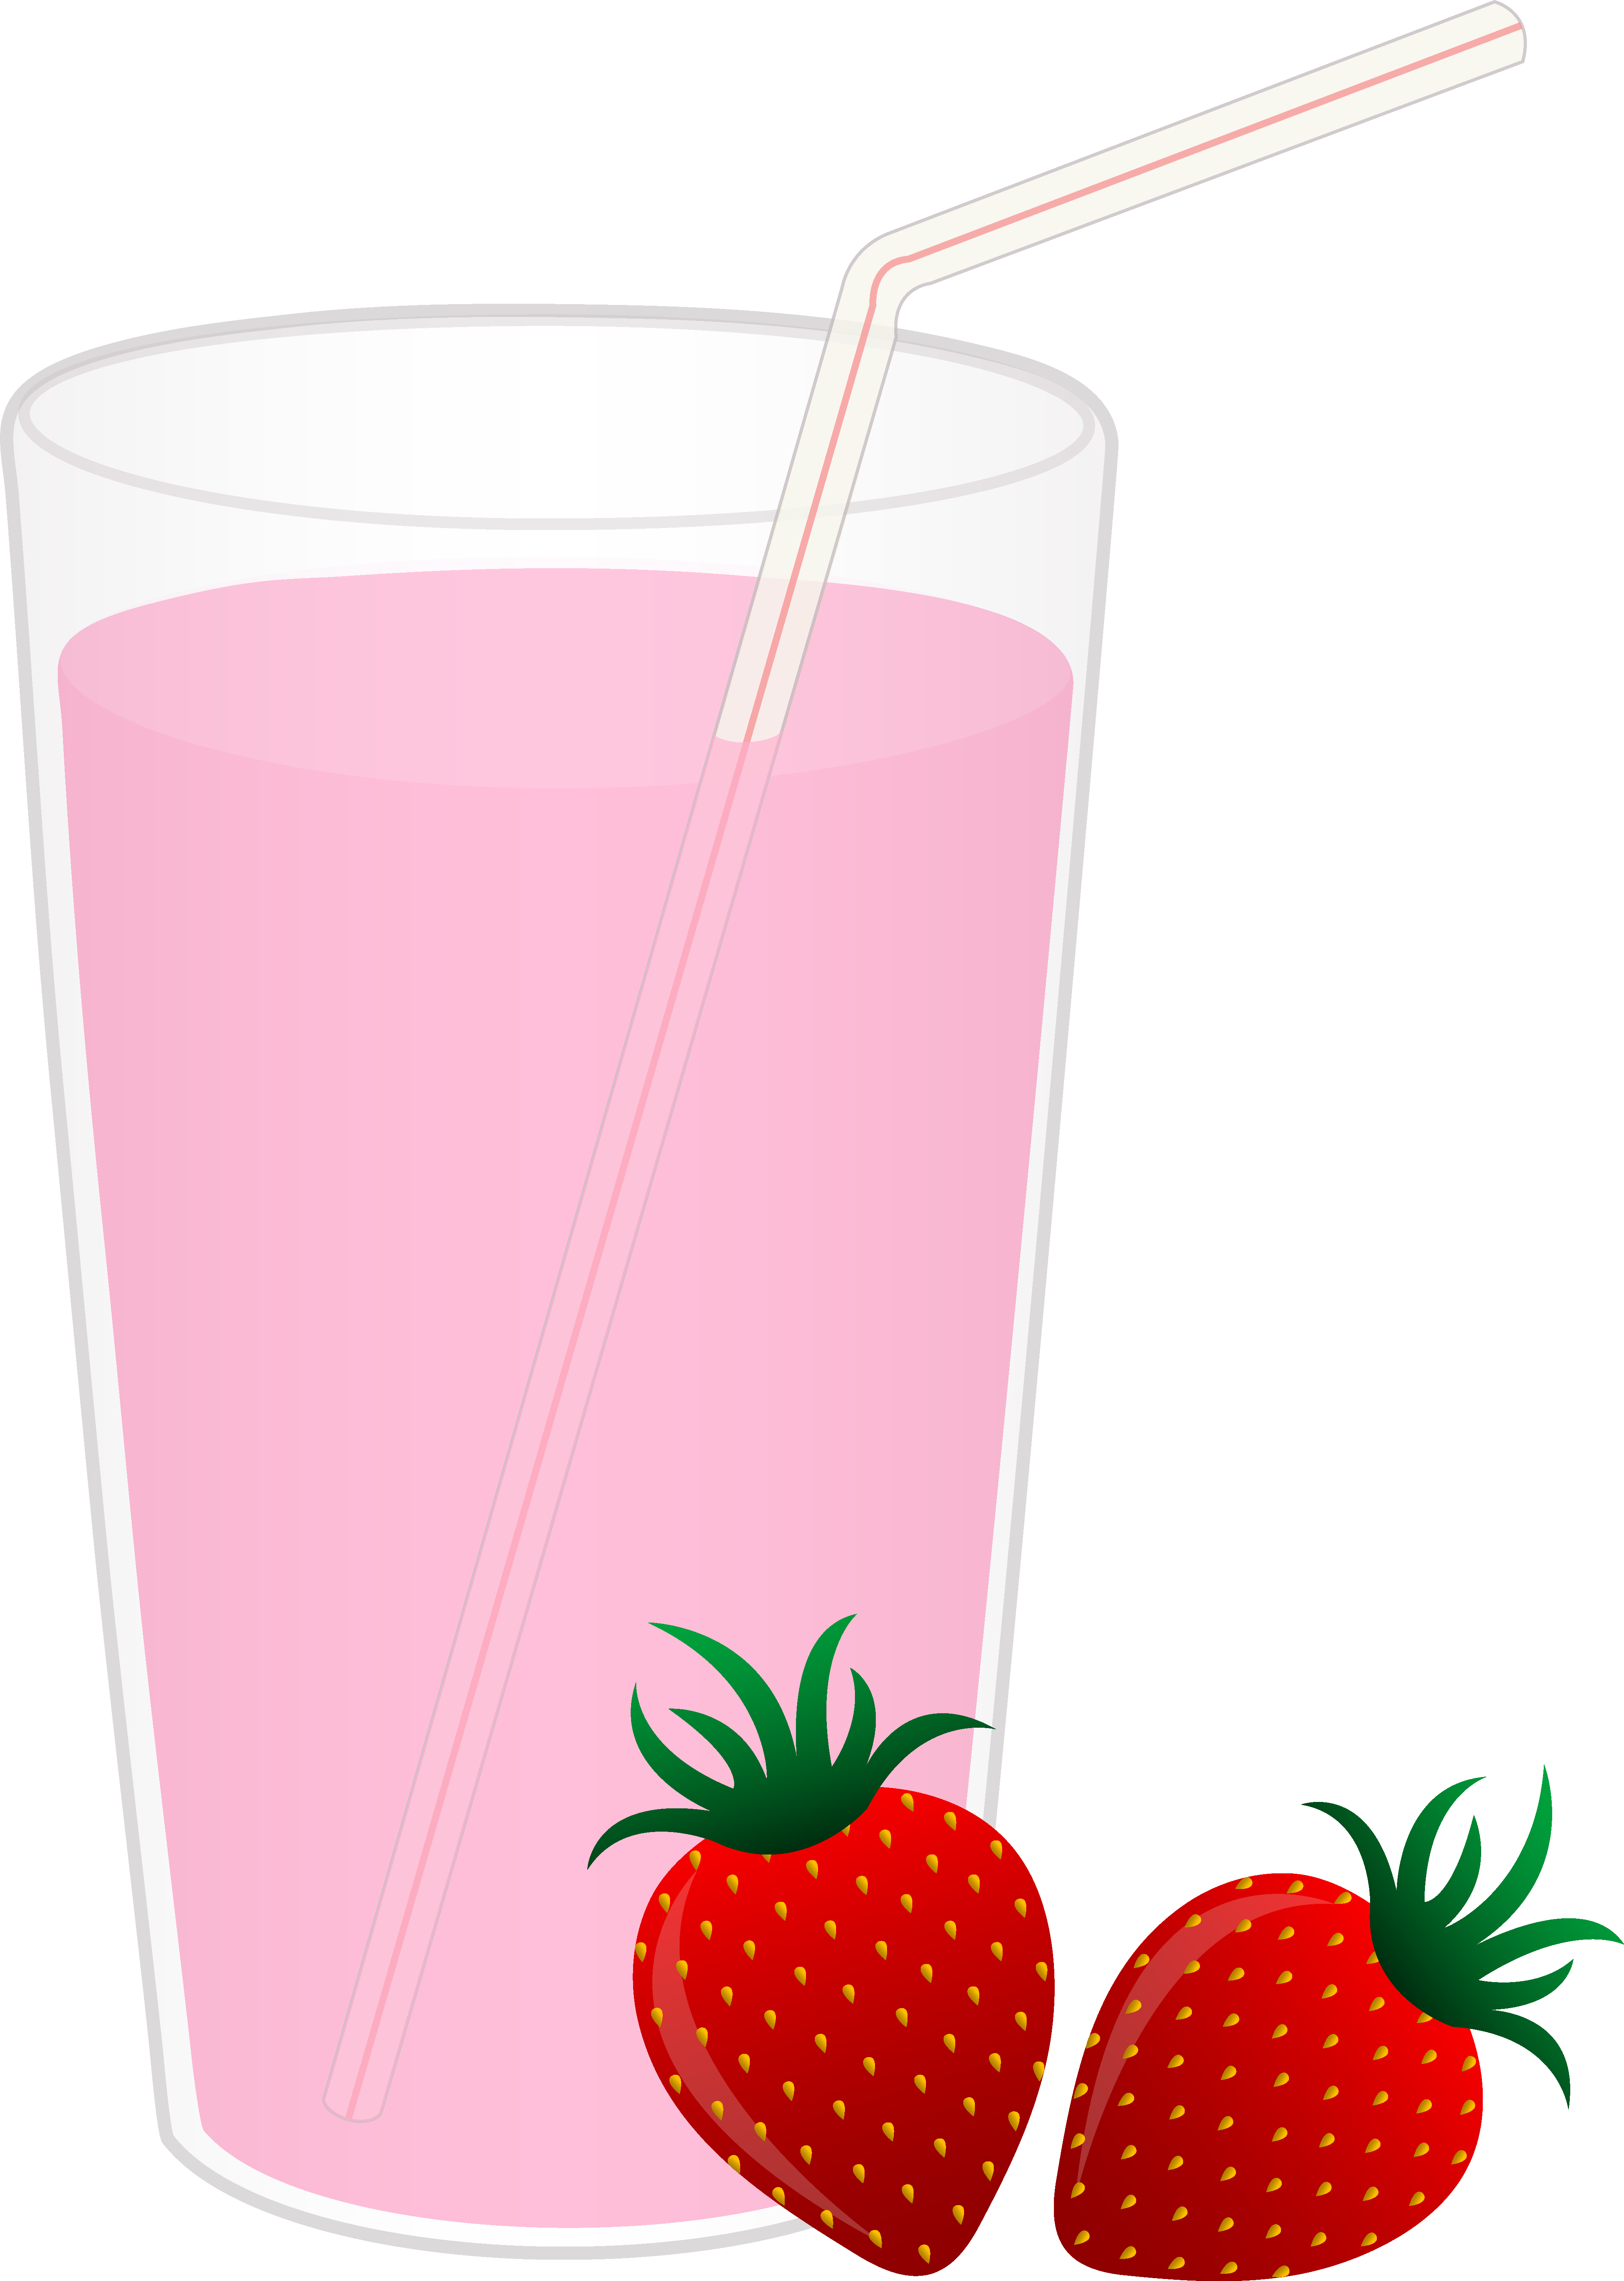 clipart of a glass of milk - photo #27